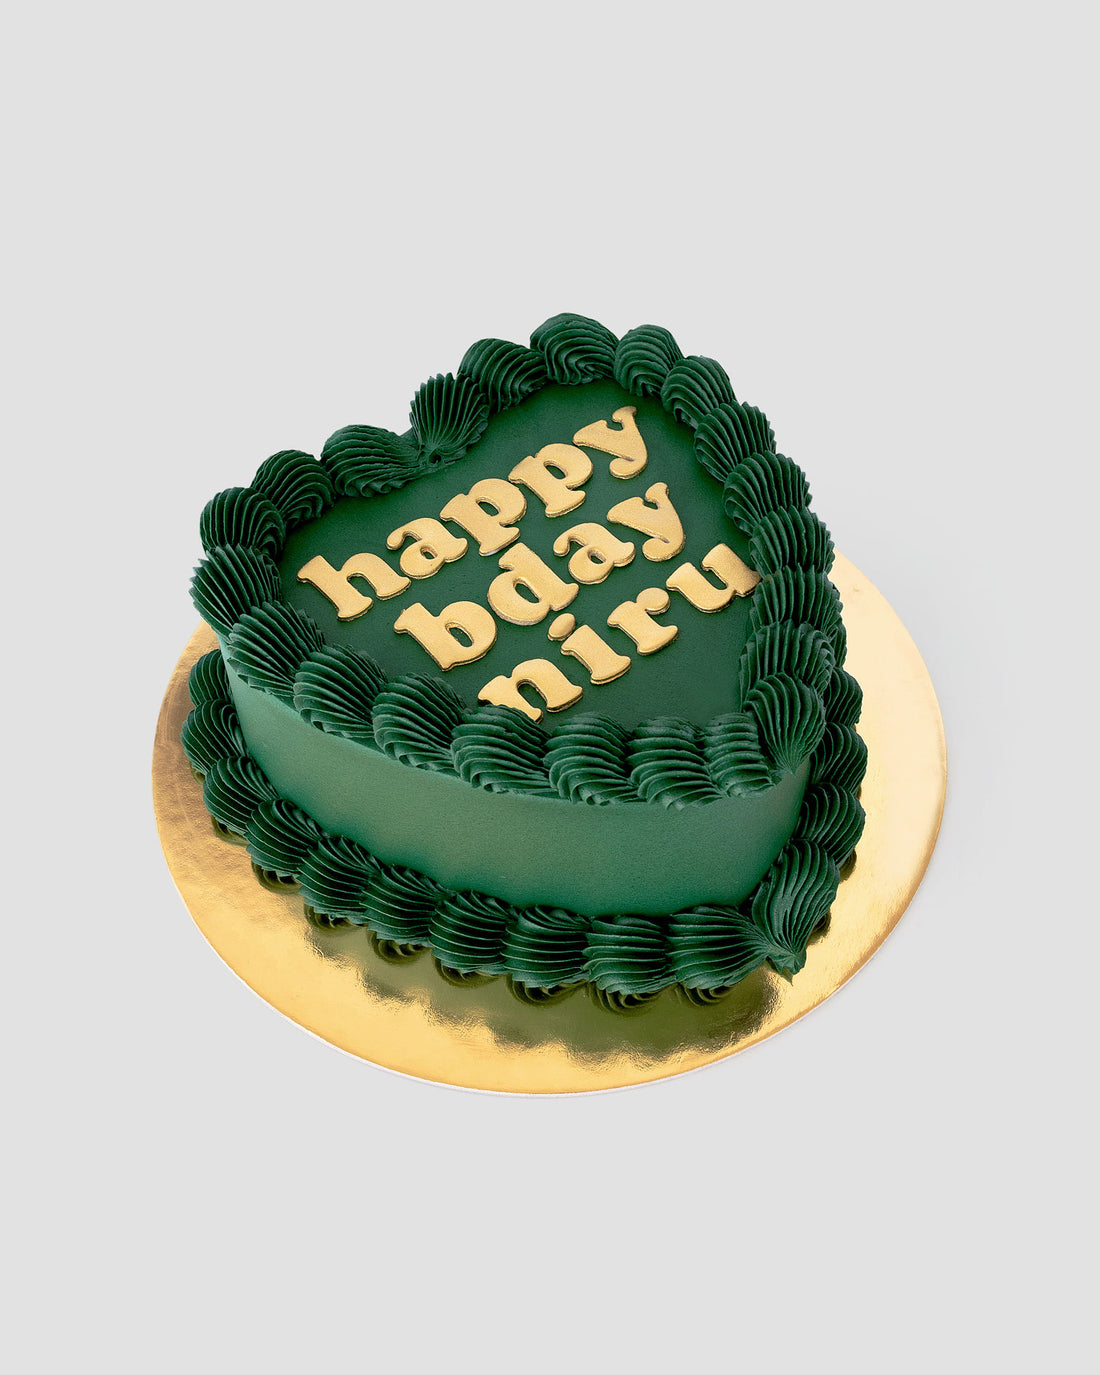 Design This Cake - Cake Size: Short | Cake Colour: Custom - Deep Forest Green | Piping Style: Simple | Piping Colour: Custom - Deep Forest Green | Add Gold Lettering